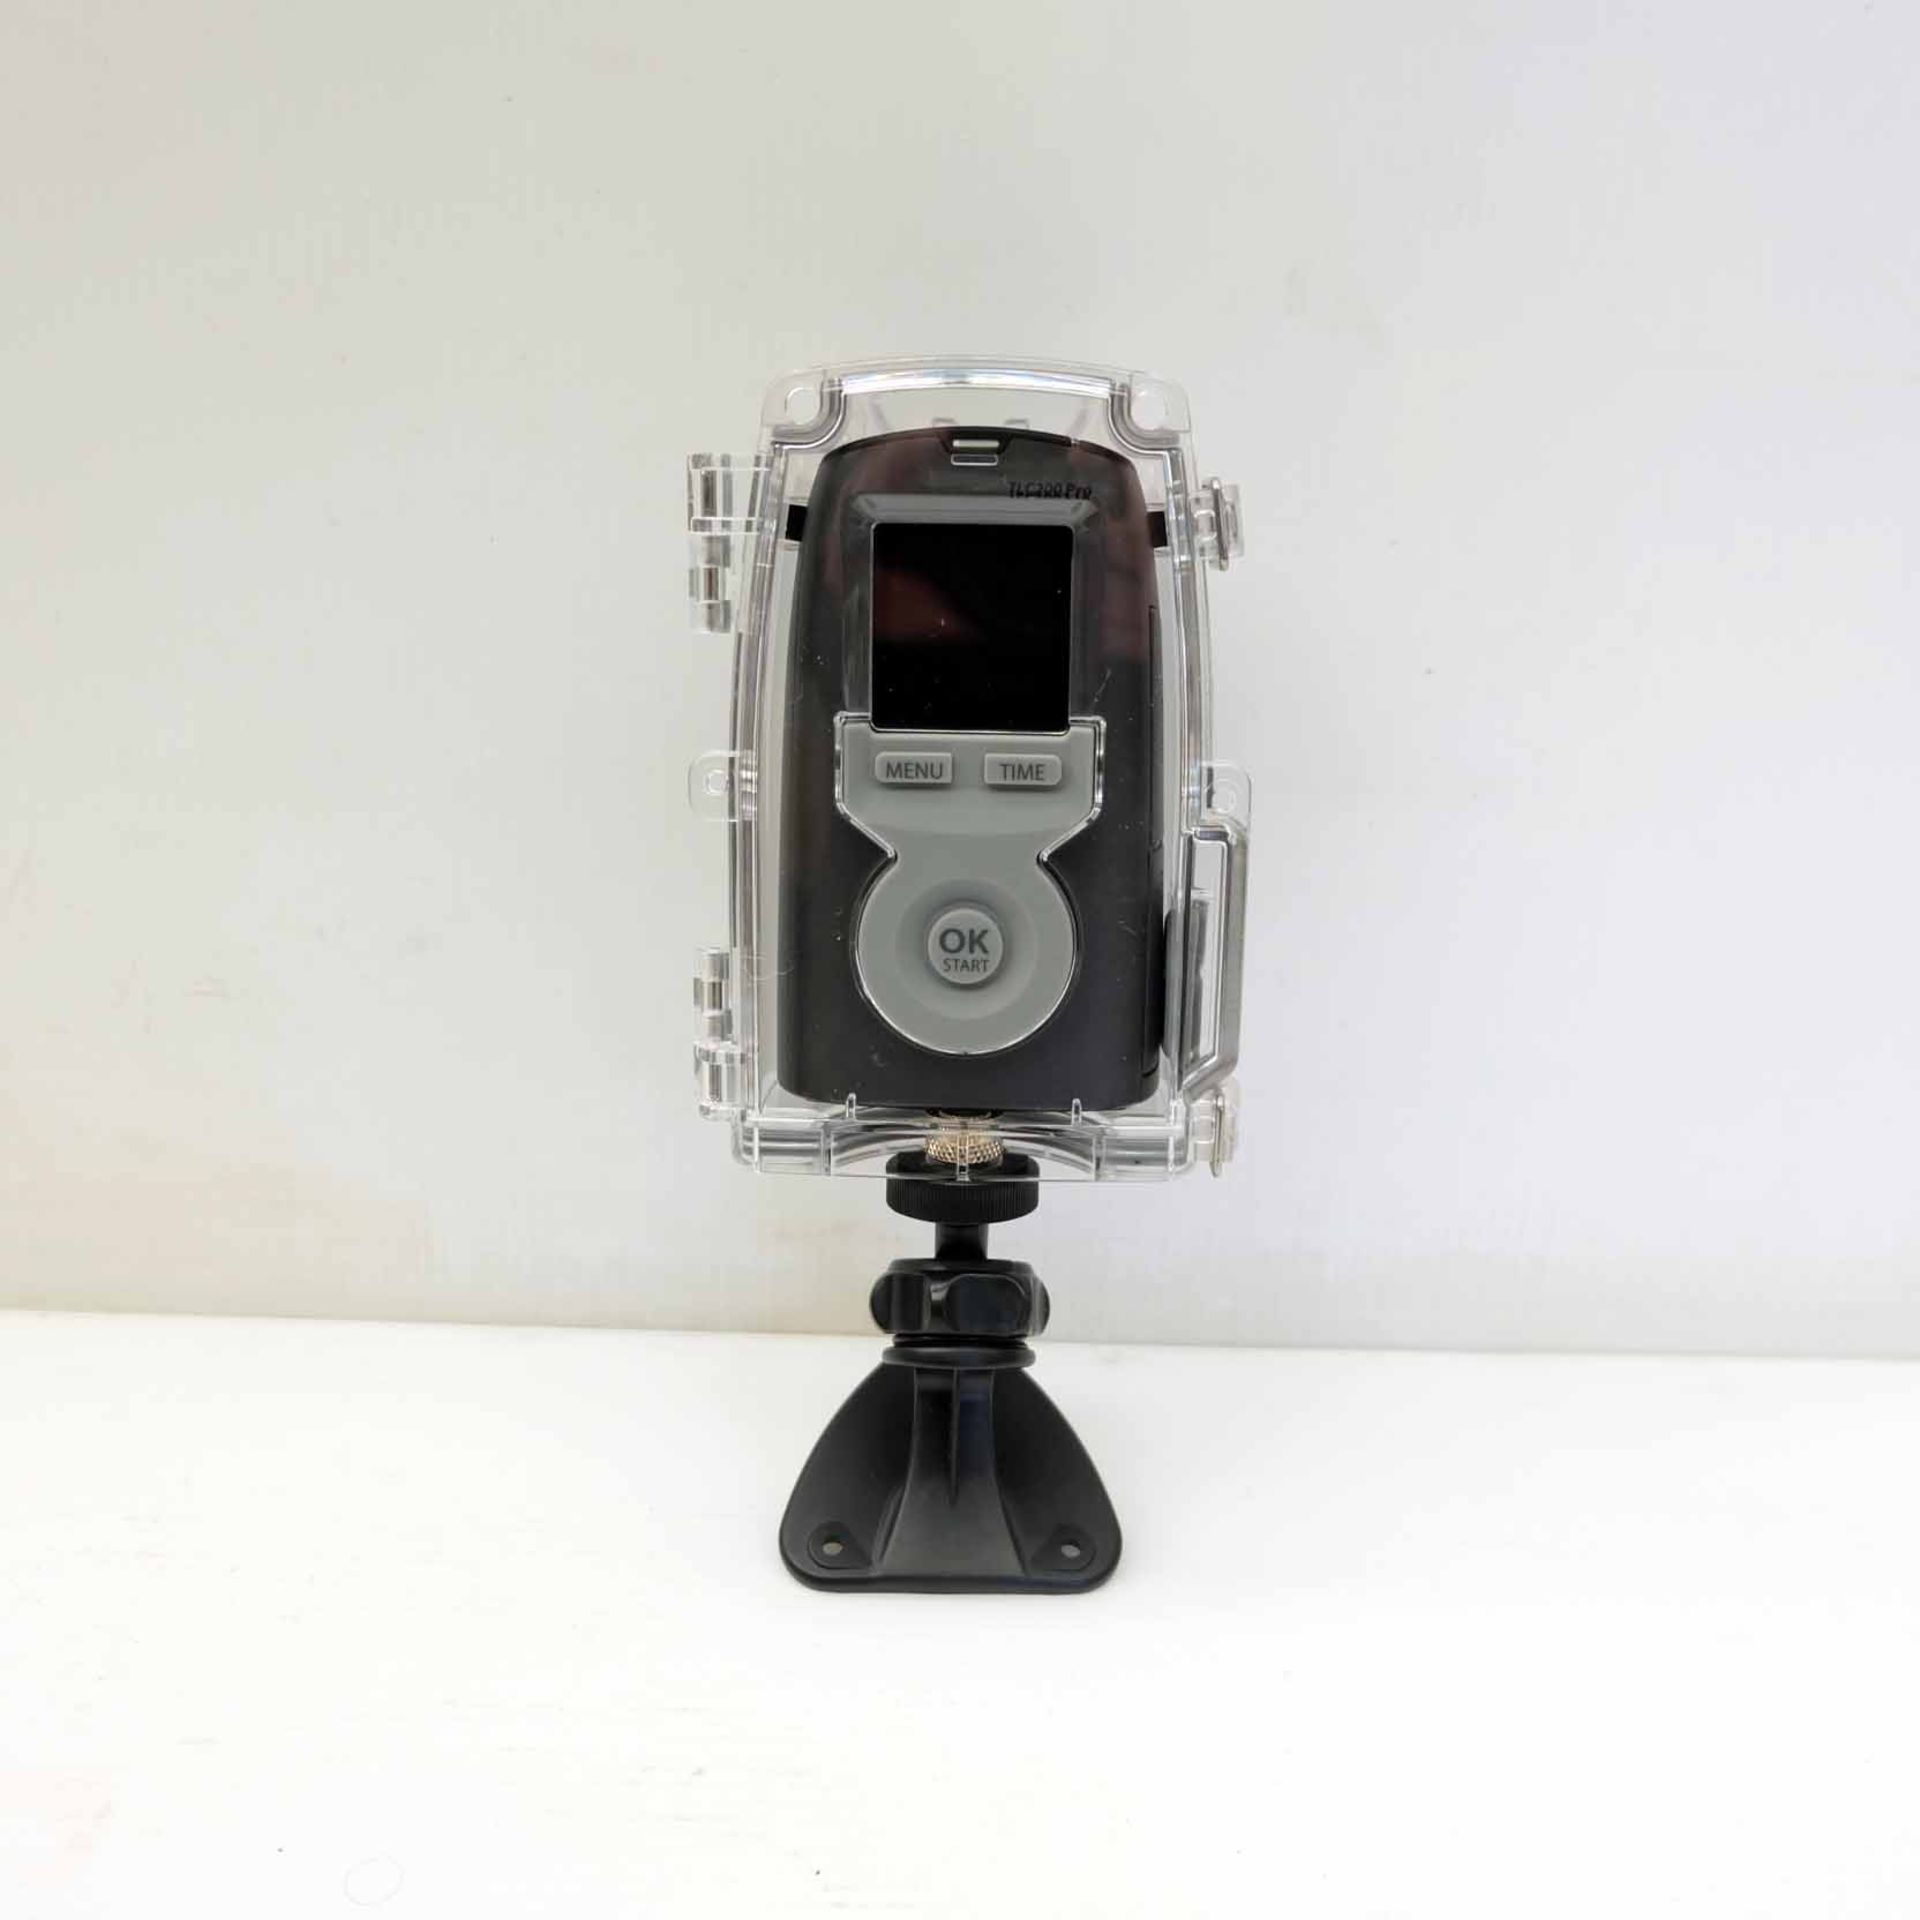 Brinno TLC200Pro Time Lapse Camera. In Waterproof Protective Case. Battery Operated. - Image 4 of 7